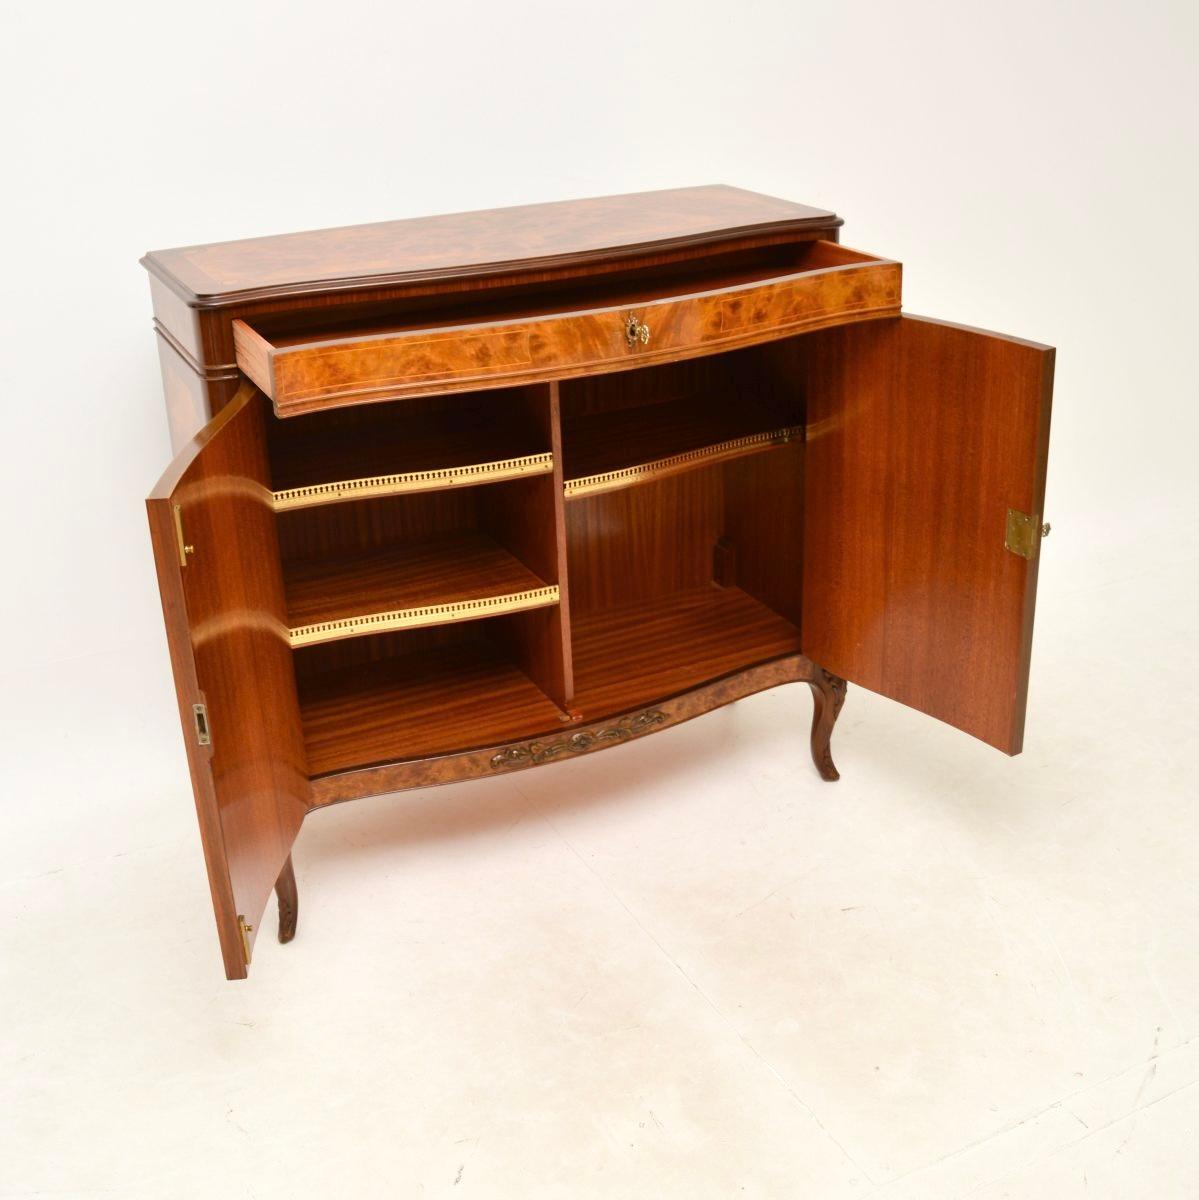 A stunning antique French inlaid walnut cabinet. This was made in France, it dates from around the 1930-50’s.

It is of superb quality and is beautifully made, predominantly from walnut and with inlays of various fruit woods. The burr walnut grain